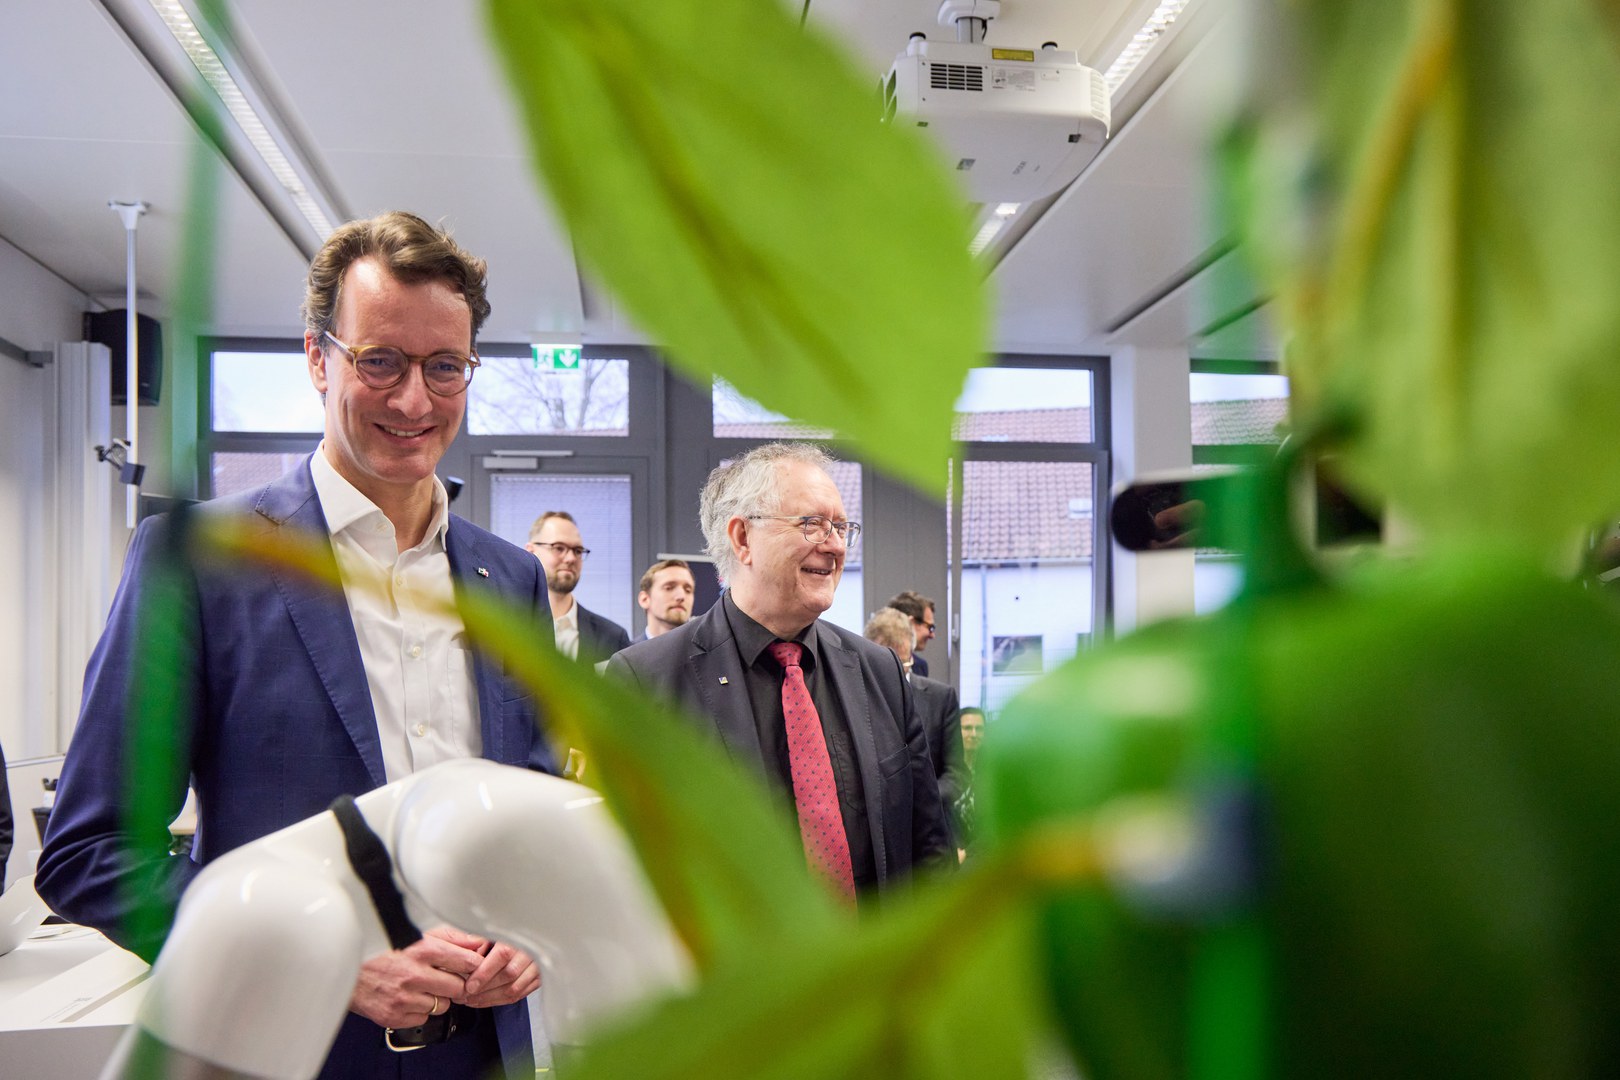 NRW state premier Wüst visiting the Humanoid Robots Lab at the University of Bonn.